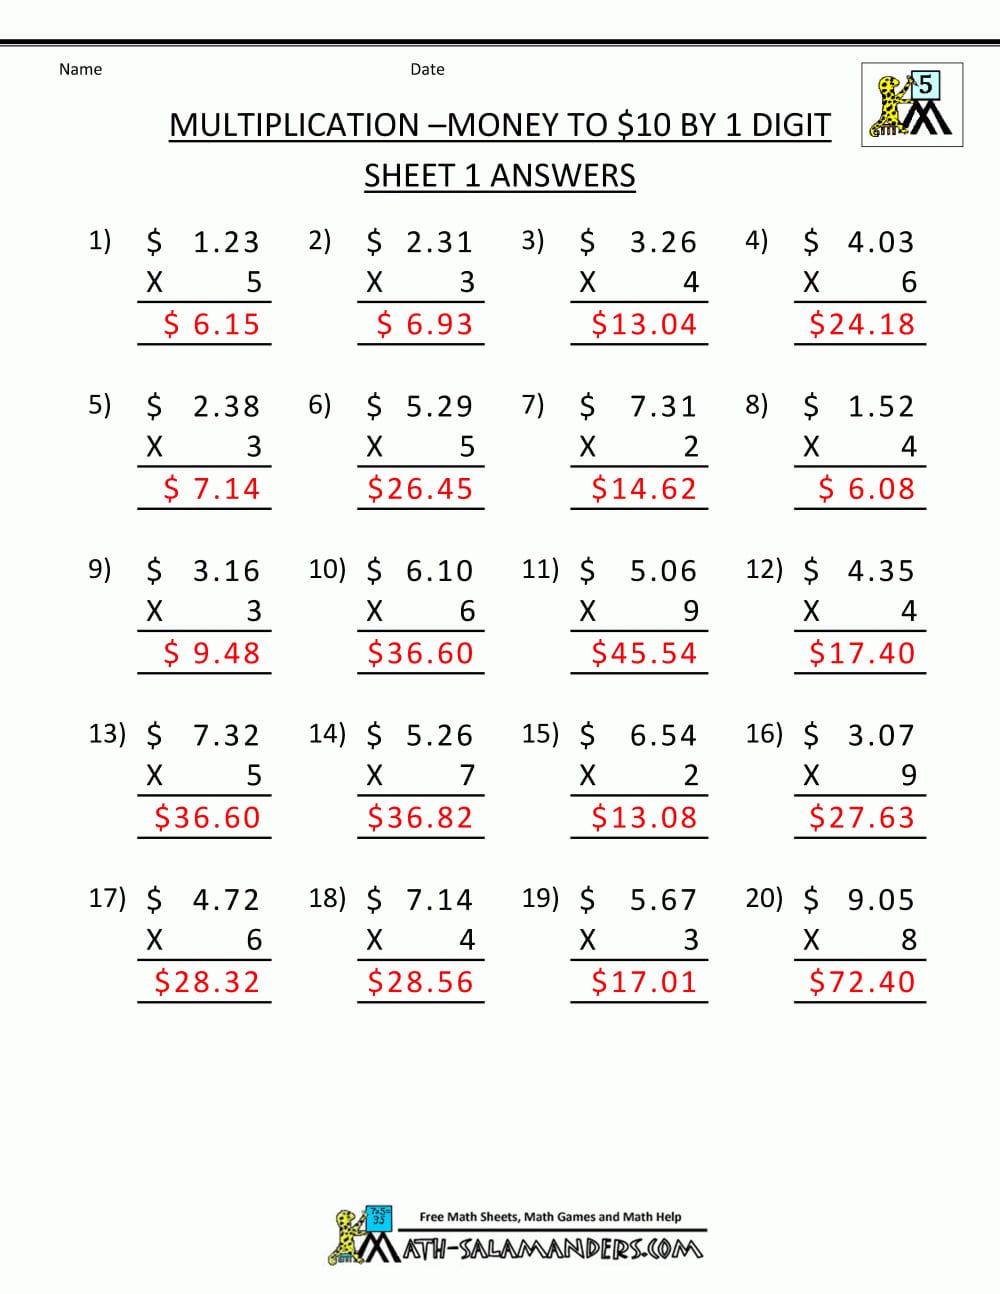 8th-grade-math-worksheets-printable-with-answers-db-excel